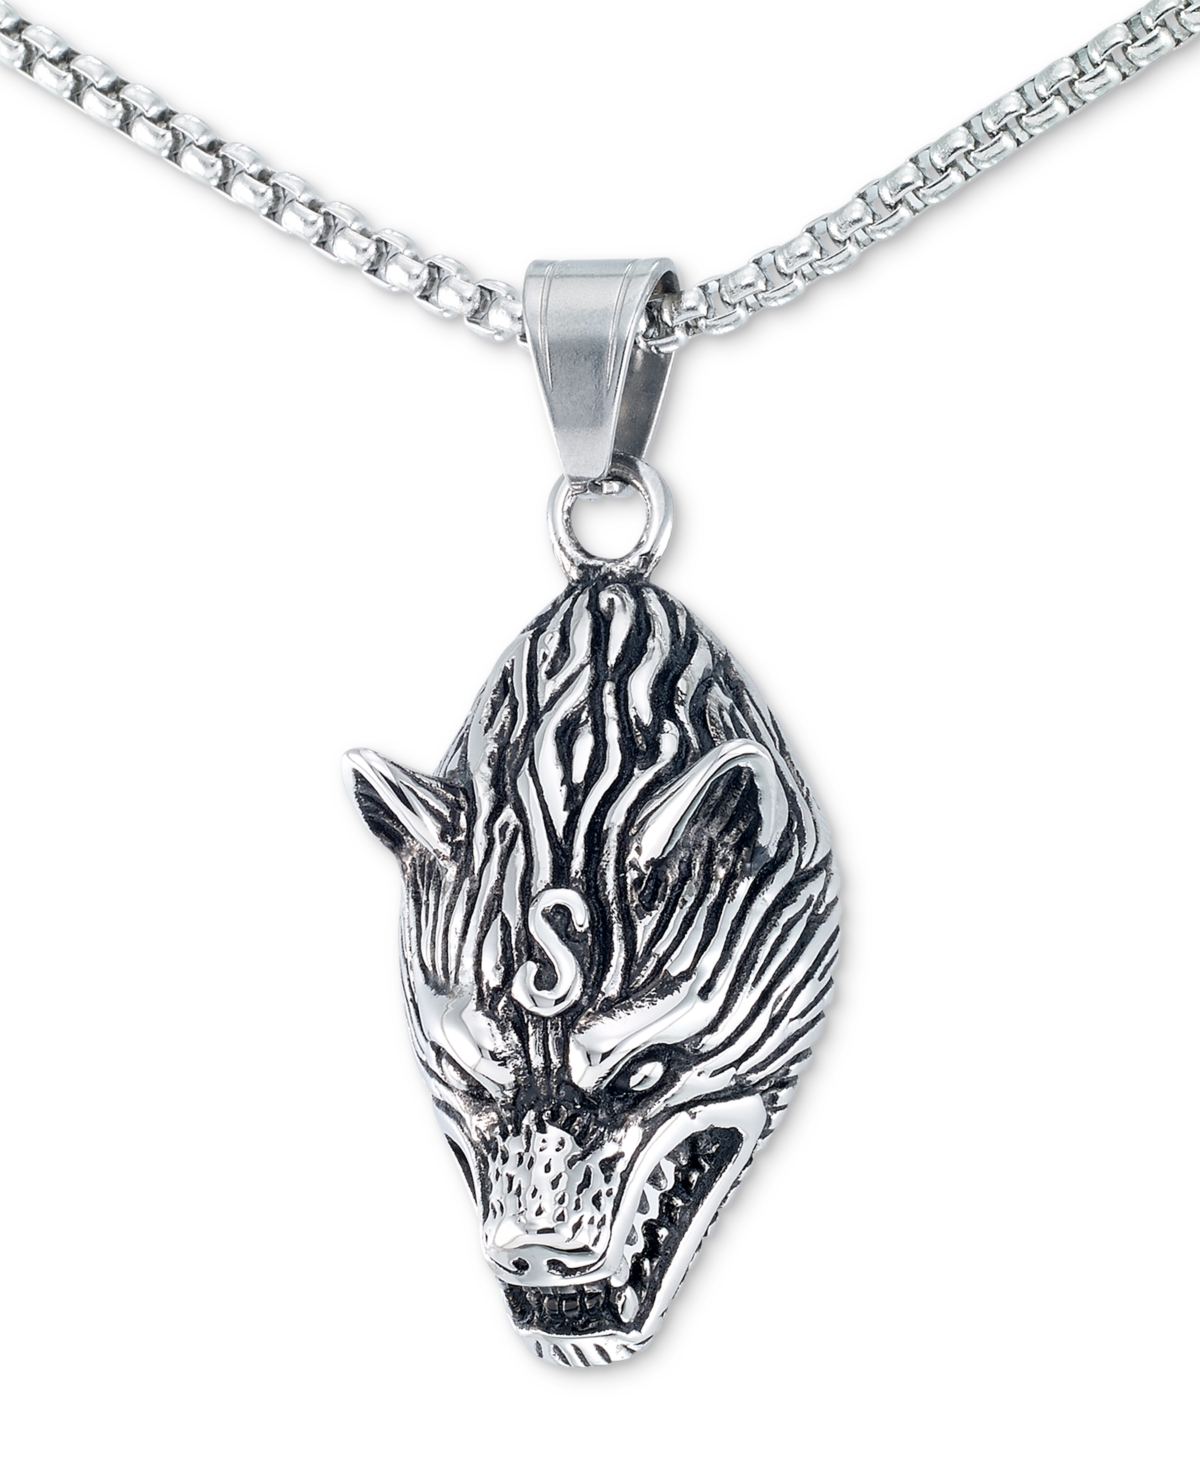 Smith Men's Wolf Head 24" Pendant Necklace in Stainless Steel - Stainless Steel